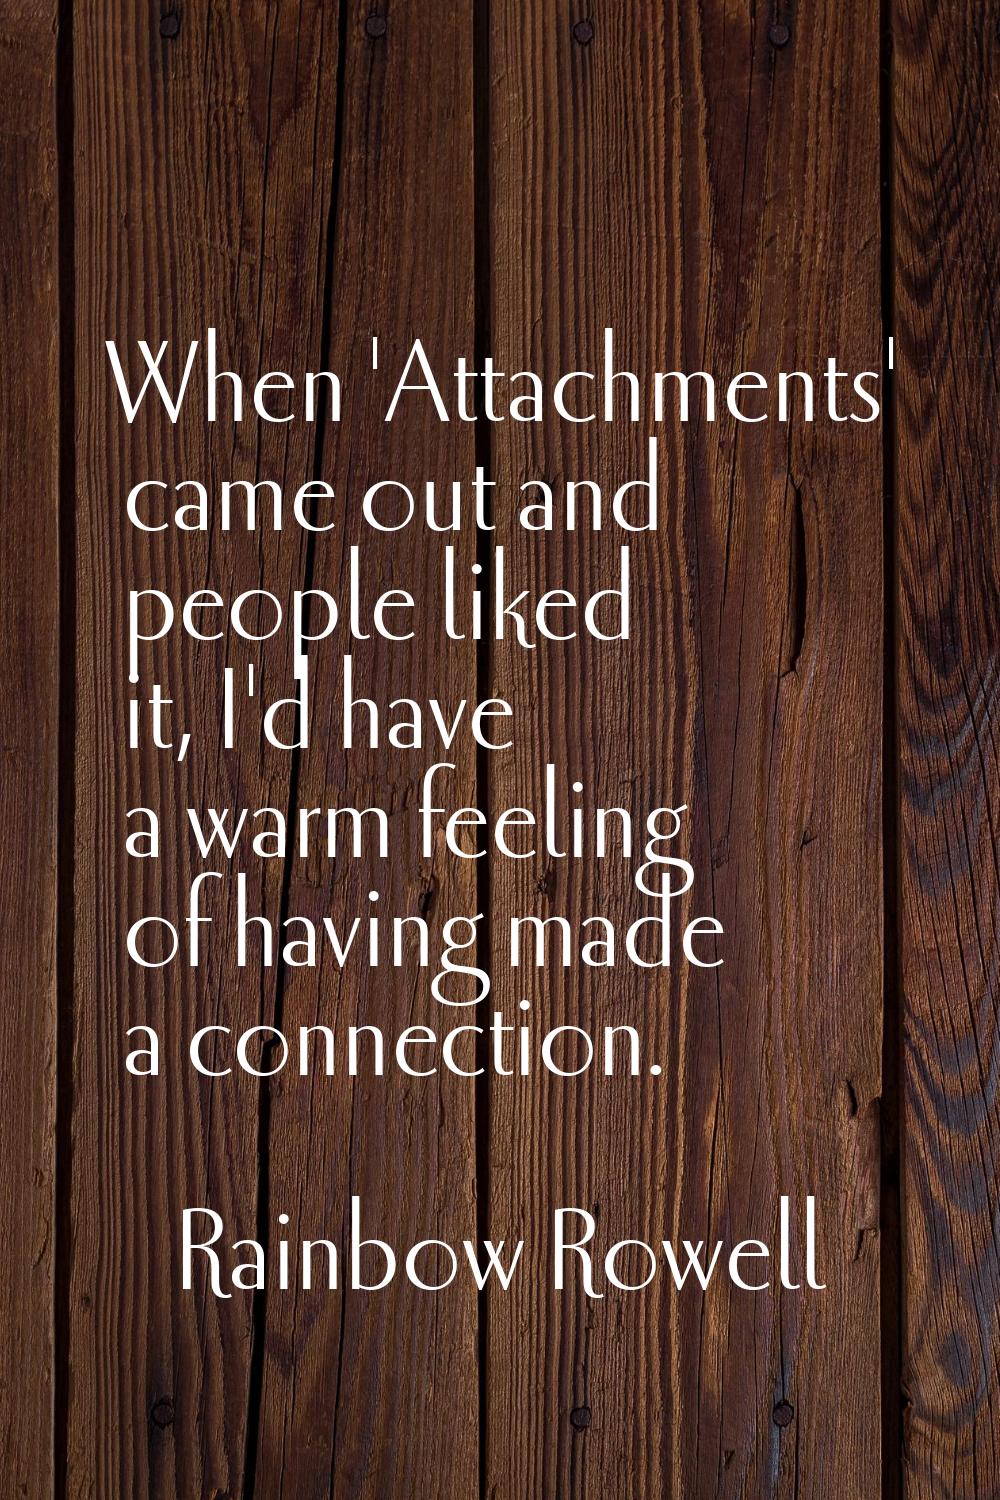 When 'Attachments' came out and people liked it, I'd have a warm feeling of having made a connectio